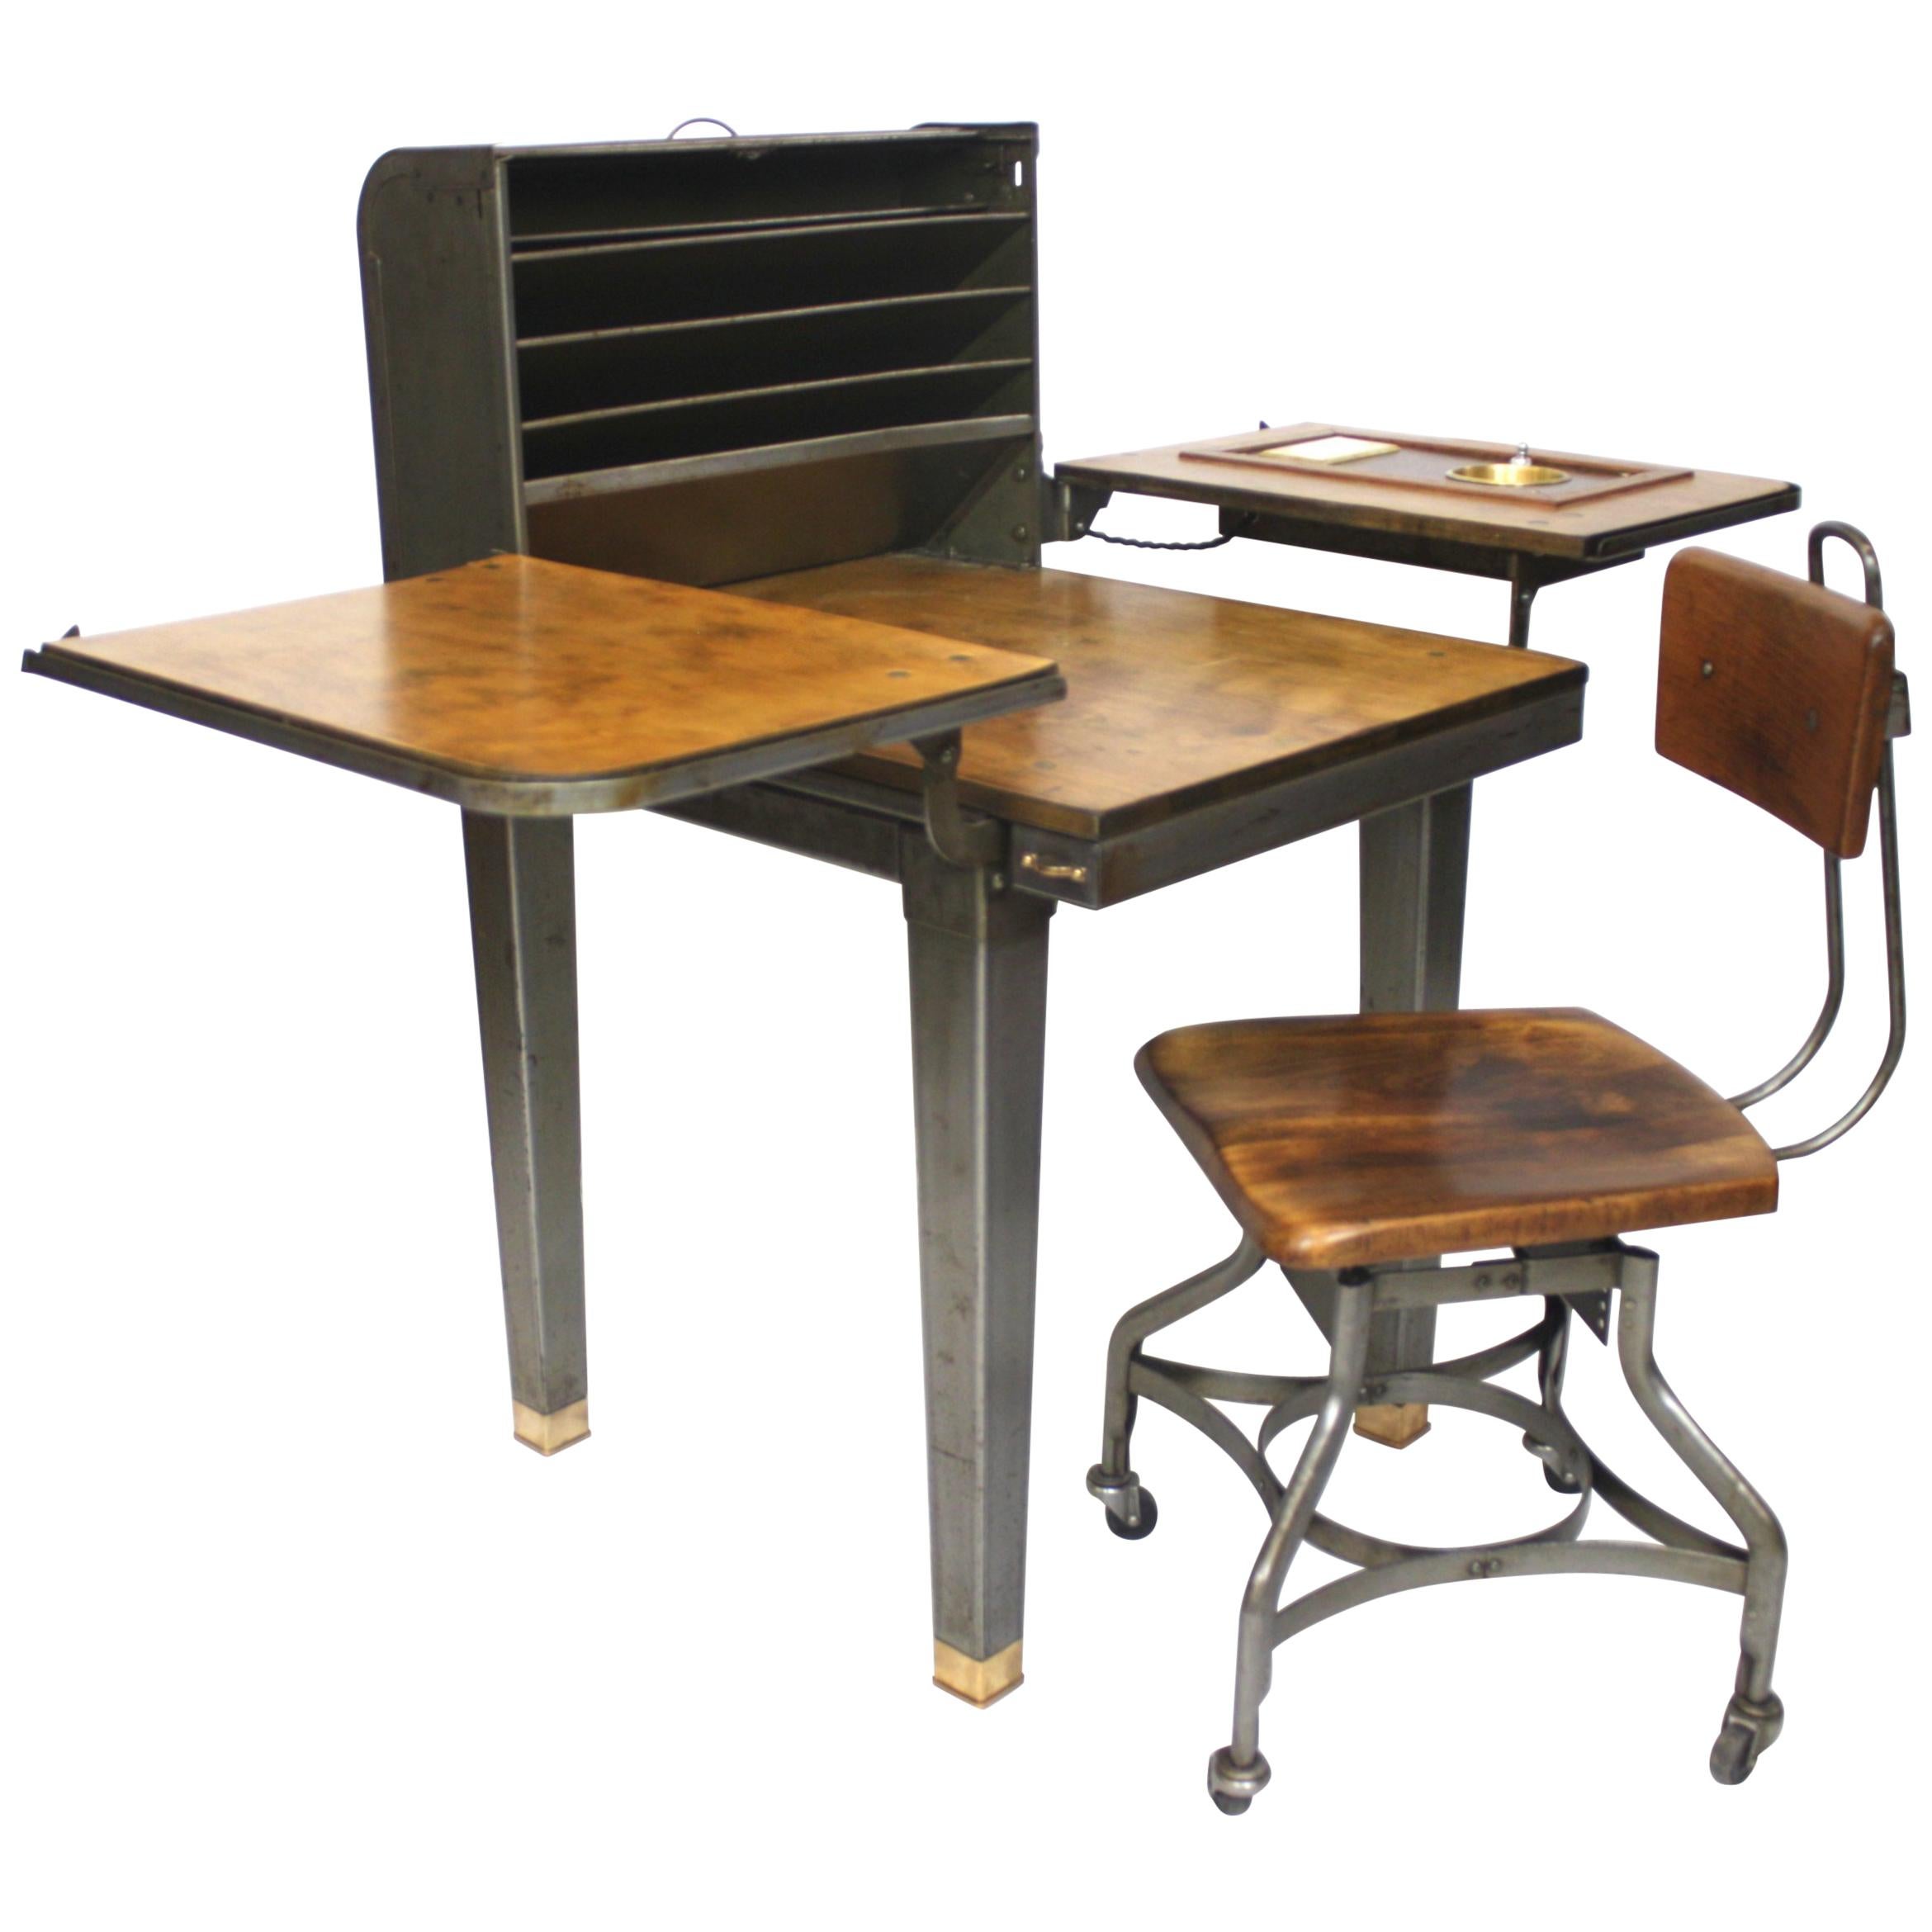 Customized Vintage Industrial Steel Folding Roll Top Desk with Chair by Toledo